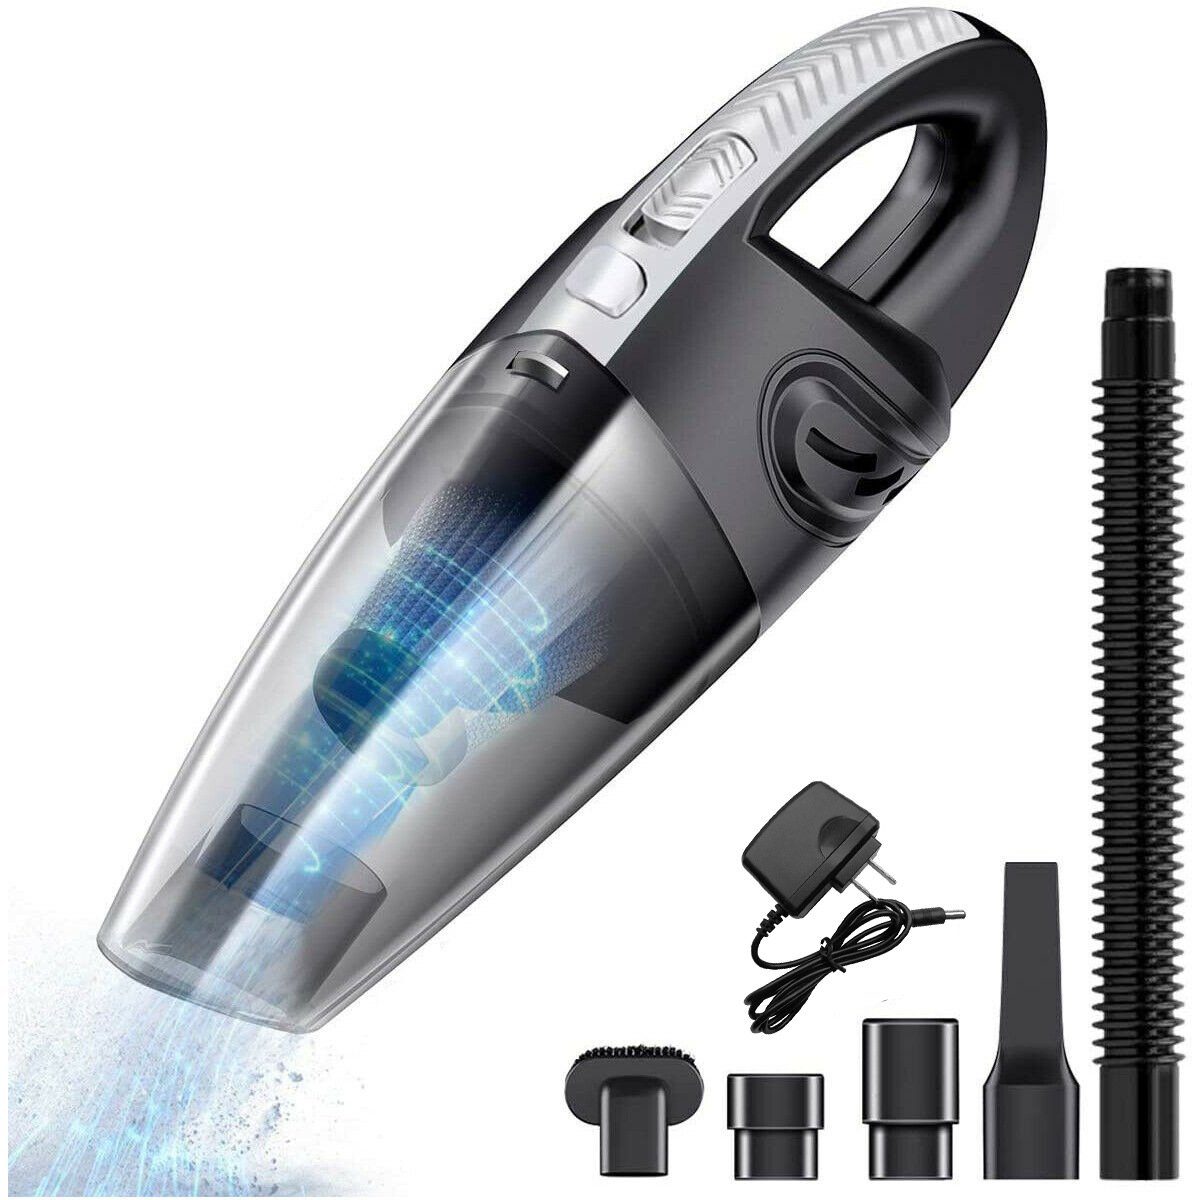 Suction Cyclone Cleaner XDOVET Vacuum Rechargeable Powerful Wireless Akku-Handstaubsauger